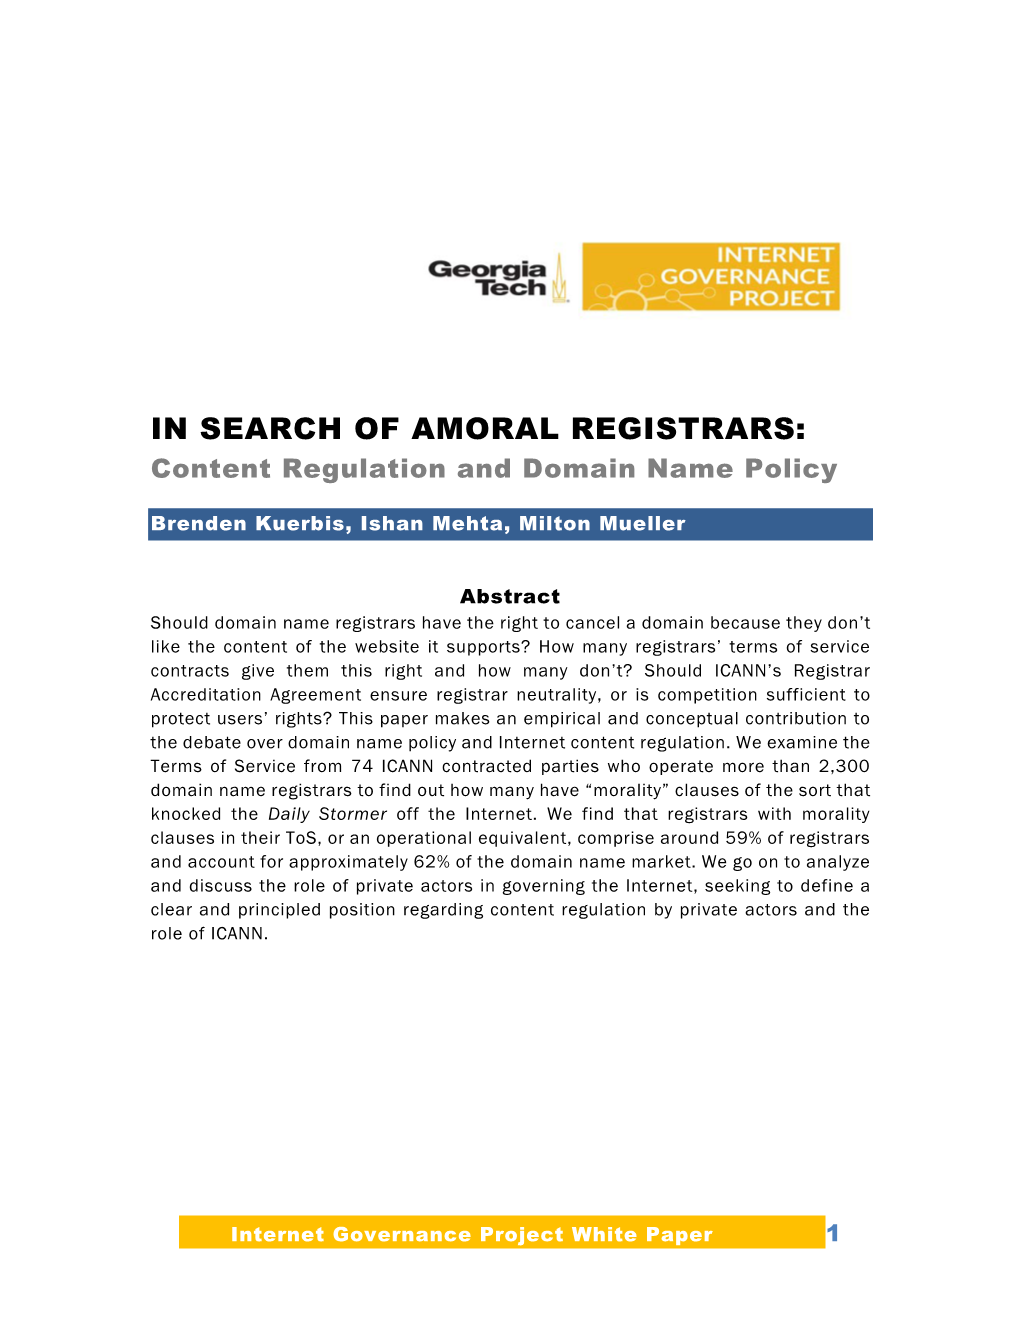 Content Regulation and Domain Name Policy